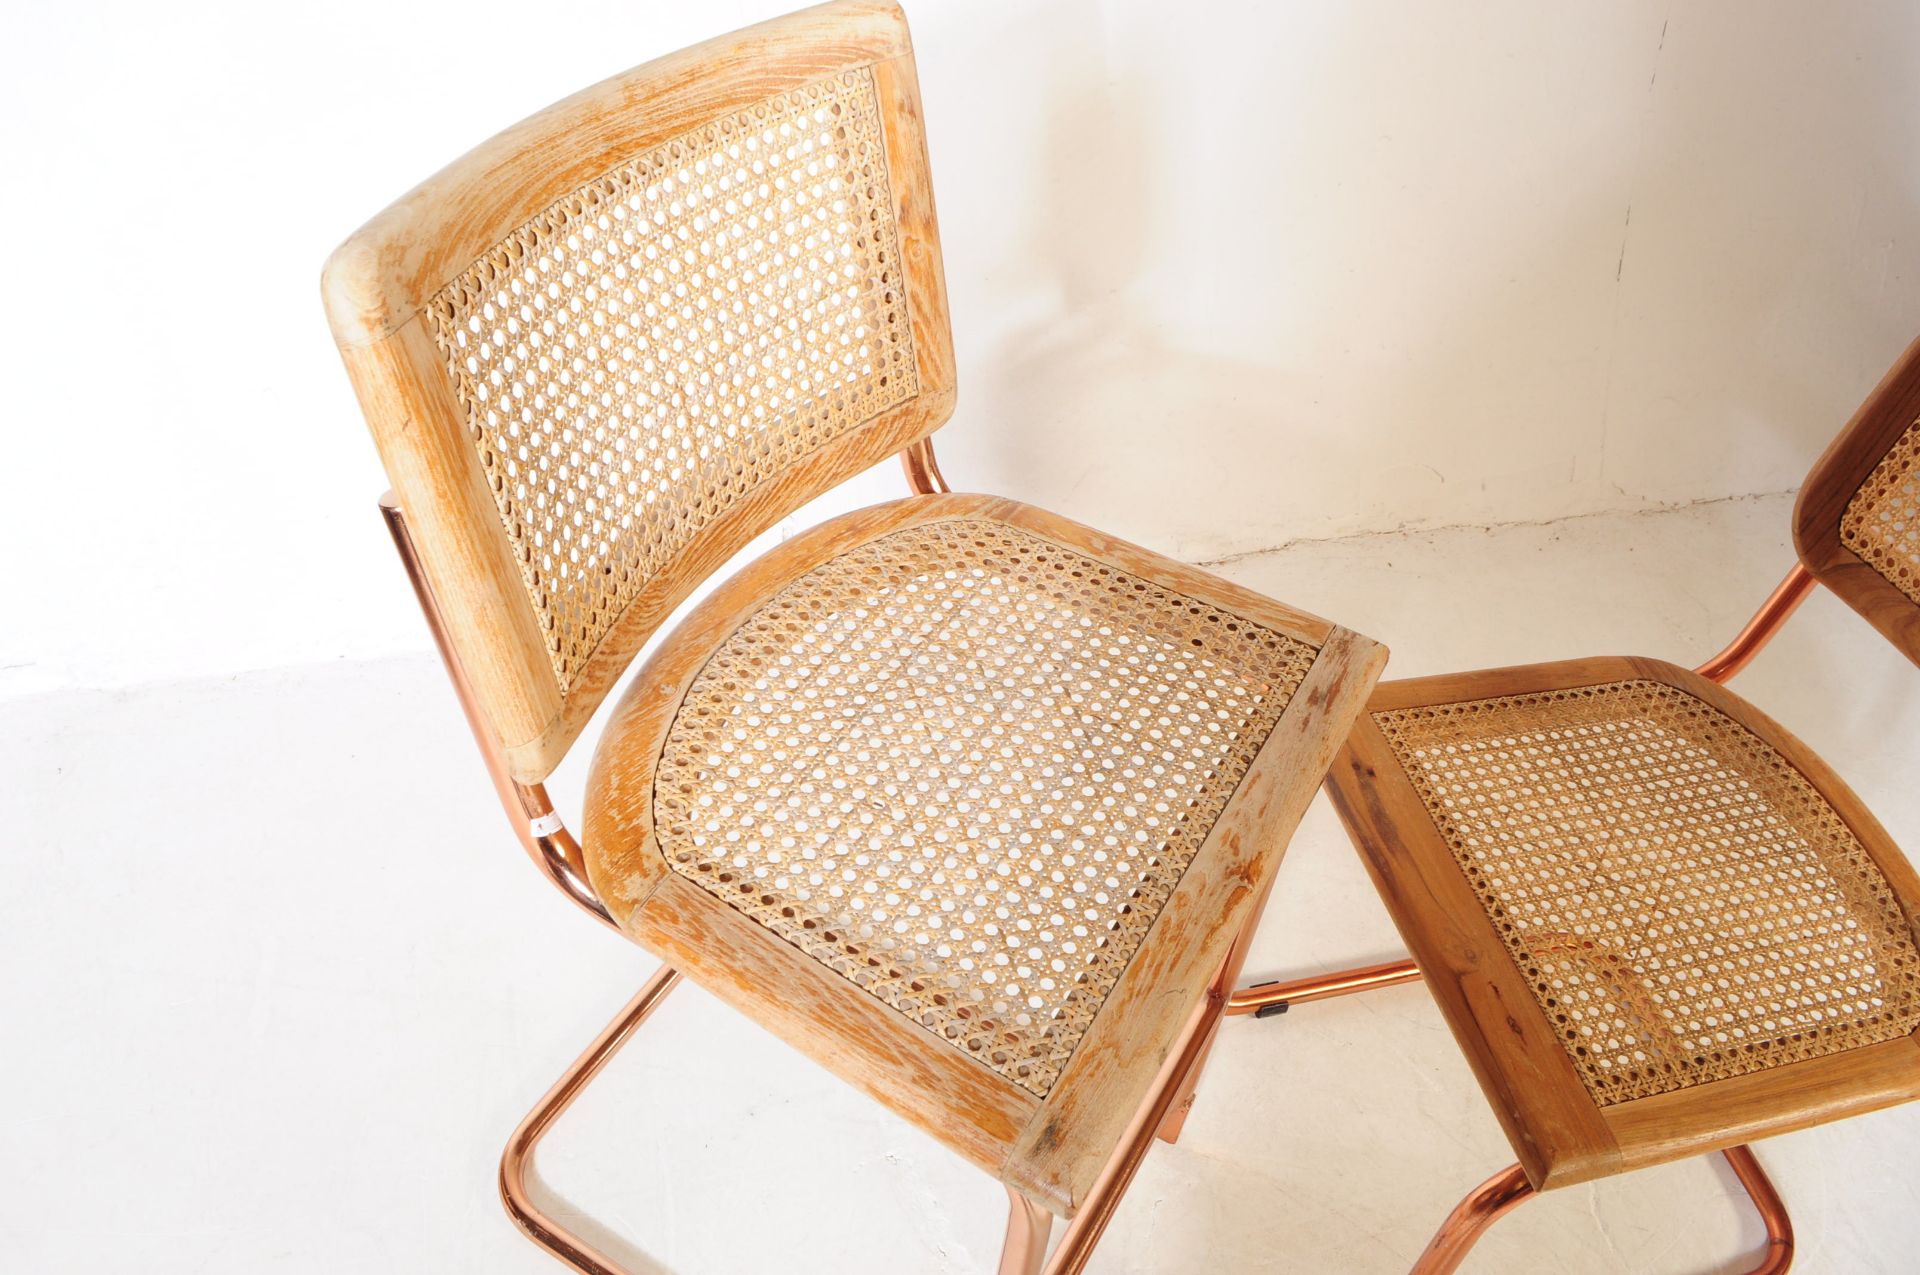 FOUR RATTAN, OAK & ROSE GOLD CHROME CANTILEVER CHAIRS - Image 4 of 5